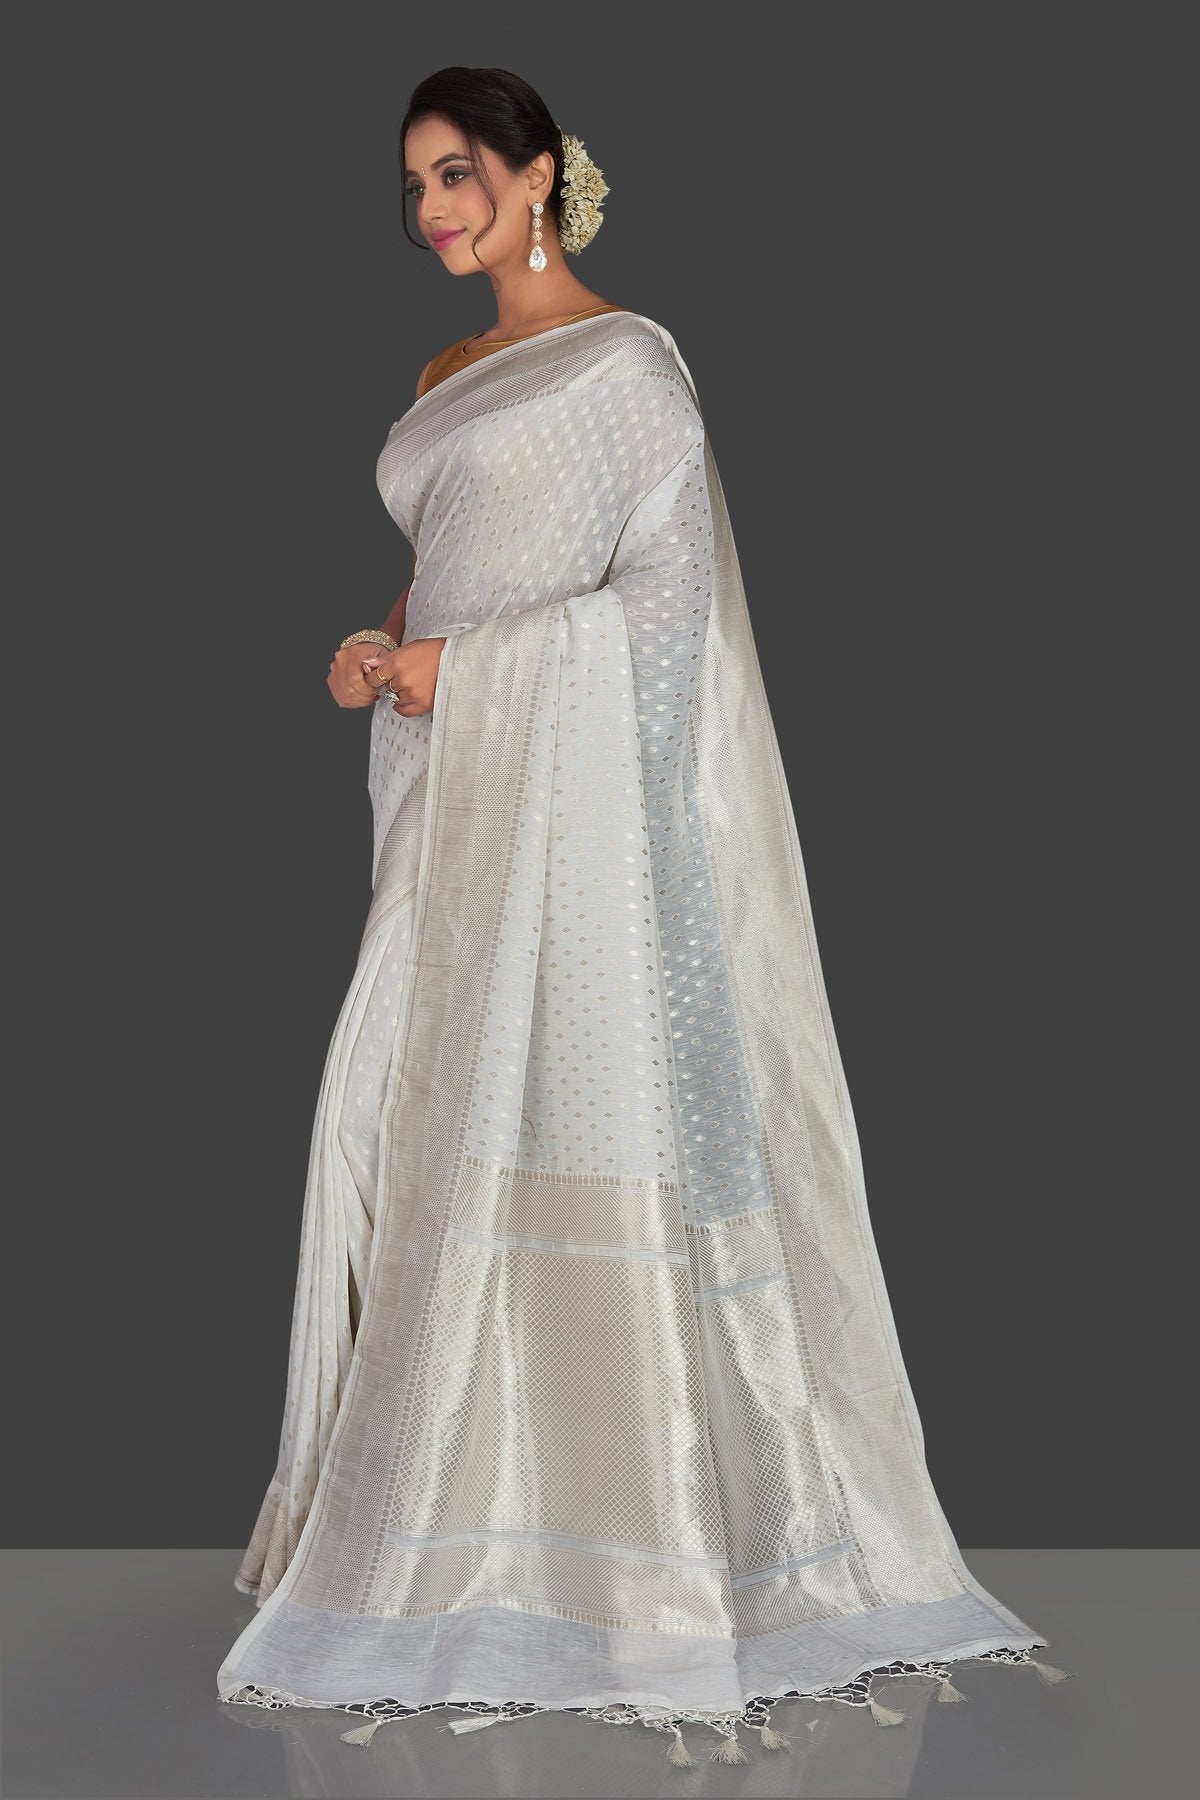 Shop white tassar georgette Banarsi saree online in USA with silver zari border. Radiate elegance with handloom sarees with blouse, tussar silk saris, Banarsi sarees from Pure Elegance Indian fashion boutique in USA. We bring a especially curated collection of ethnic saris for Indian women in USA under one roof!-full view